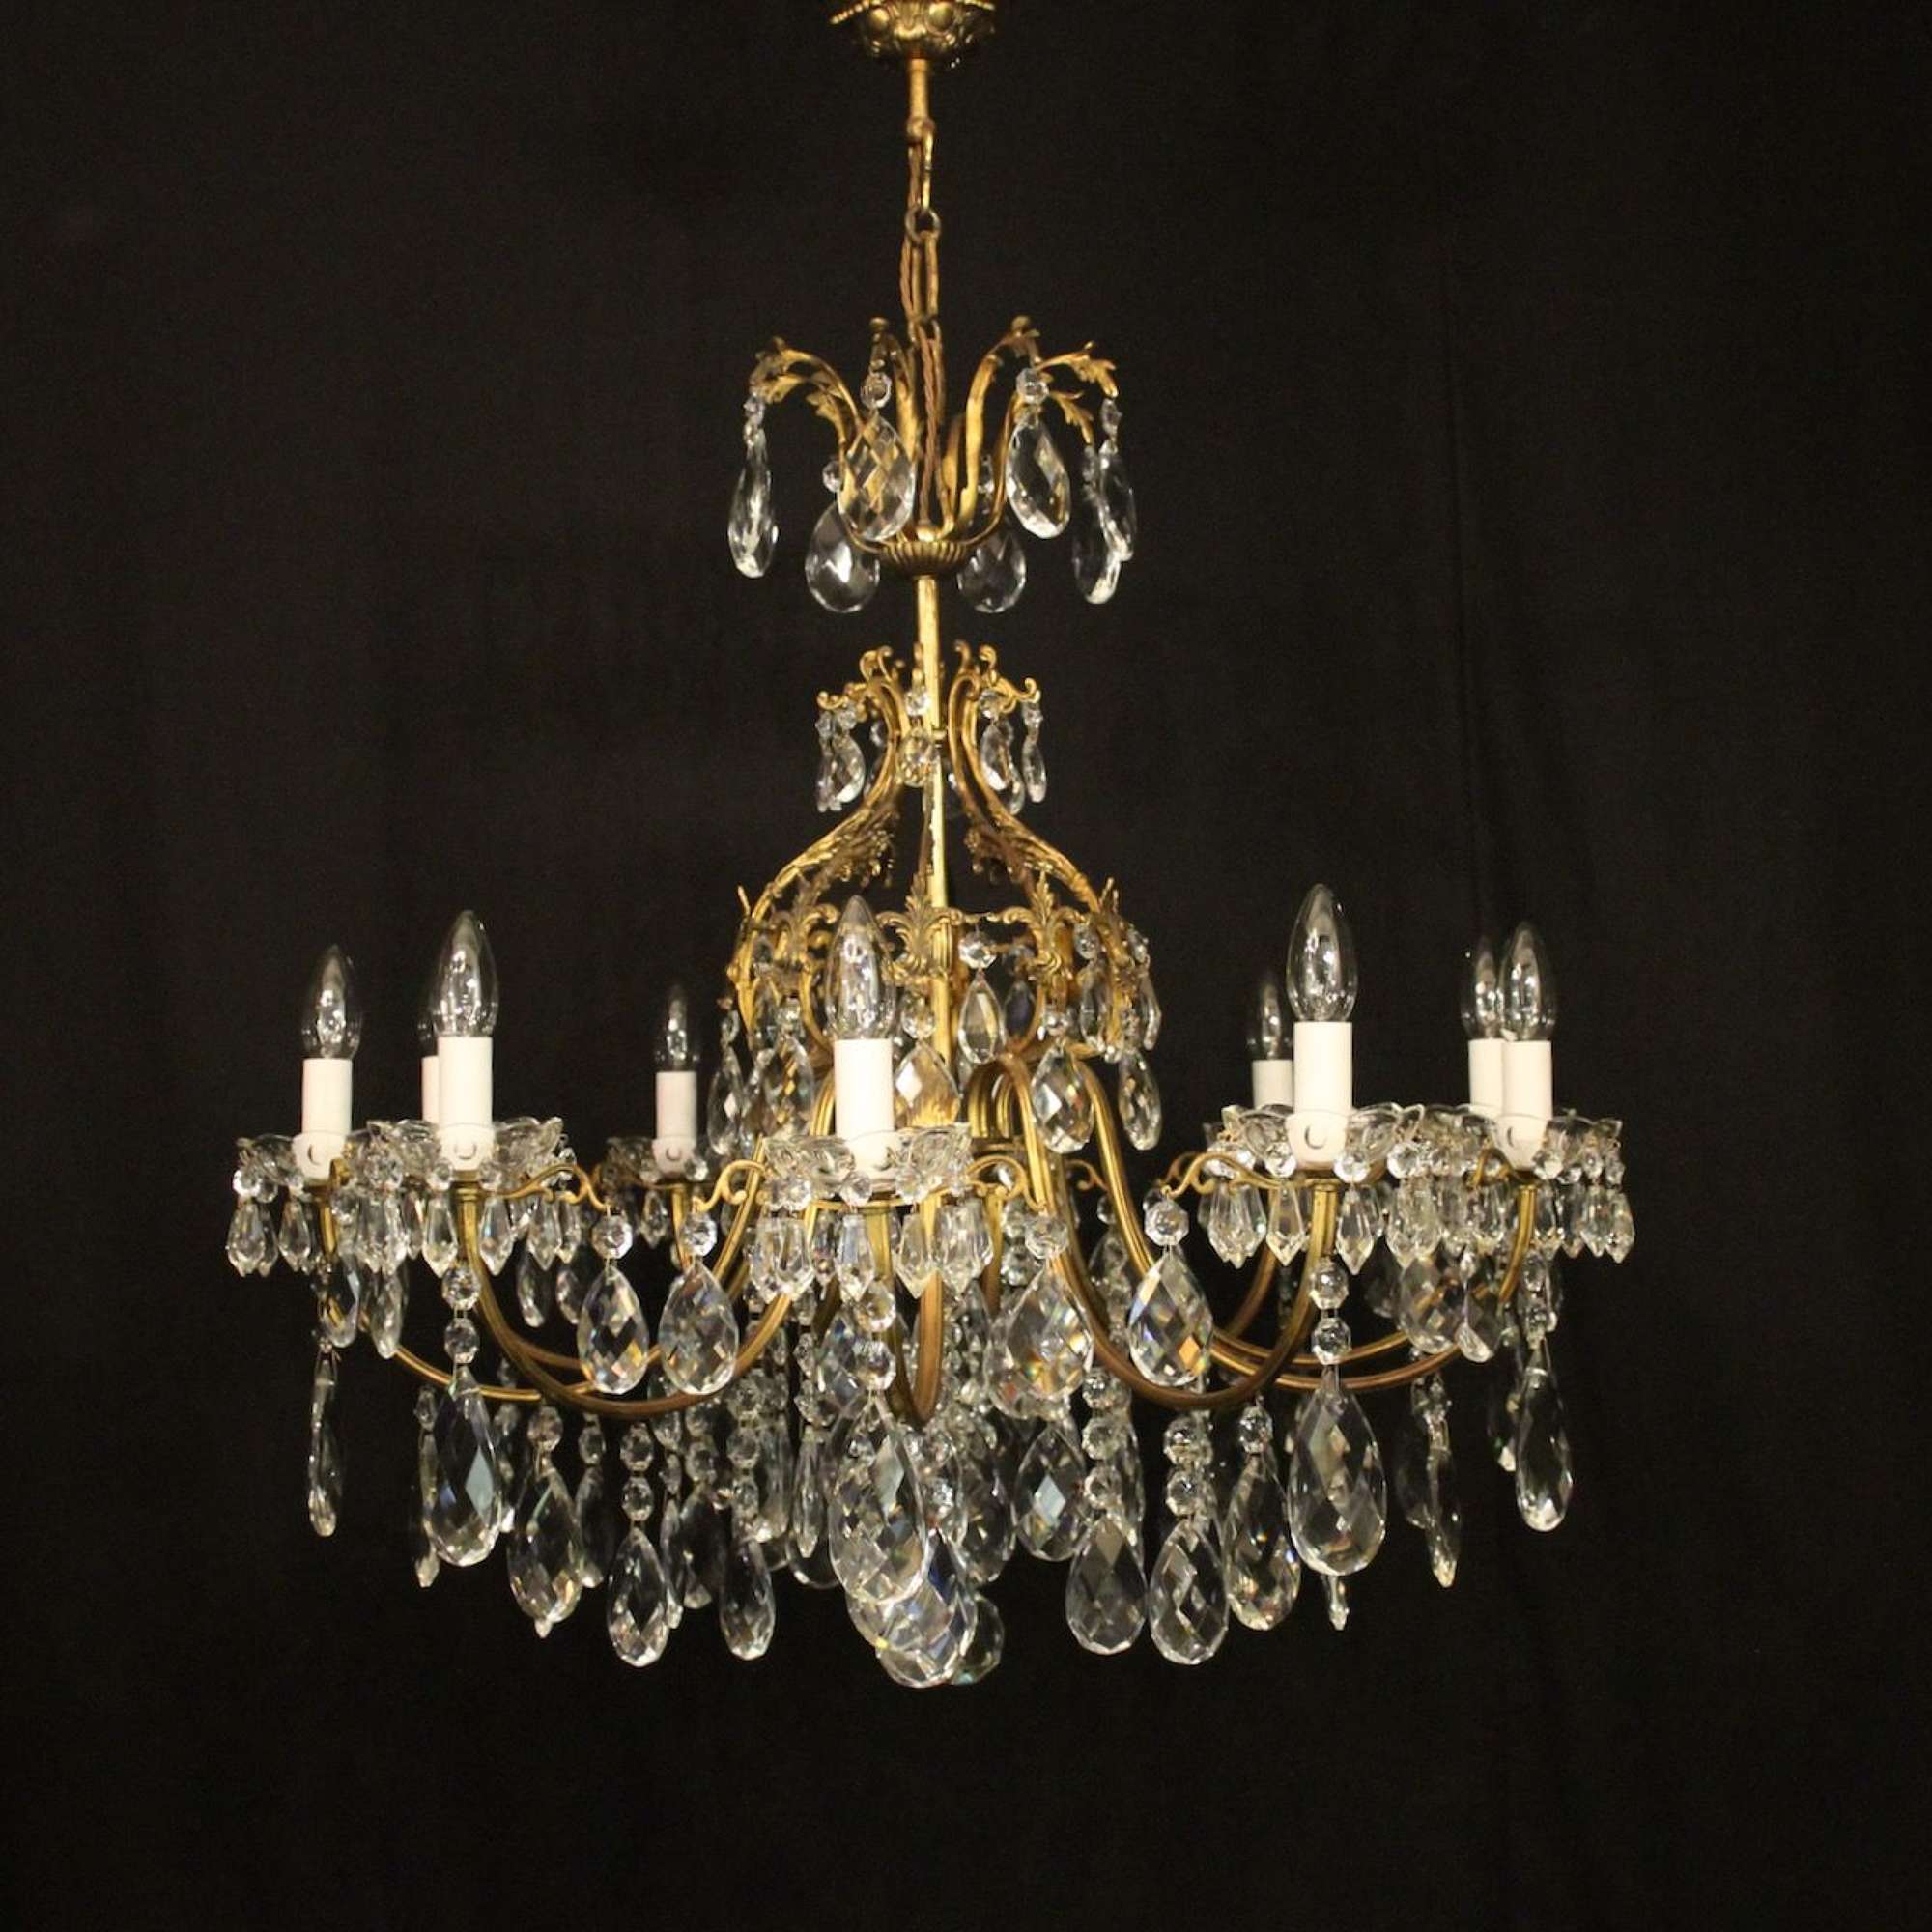 French Gilded Bronze & Crystal 10 Light Antique Chandelier